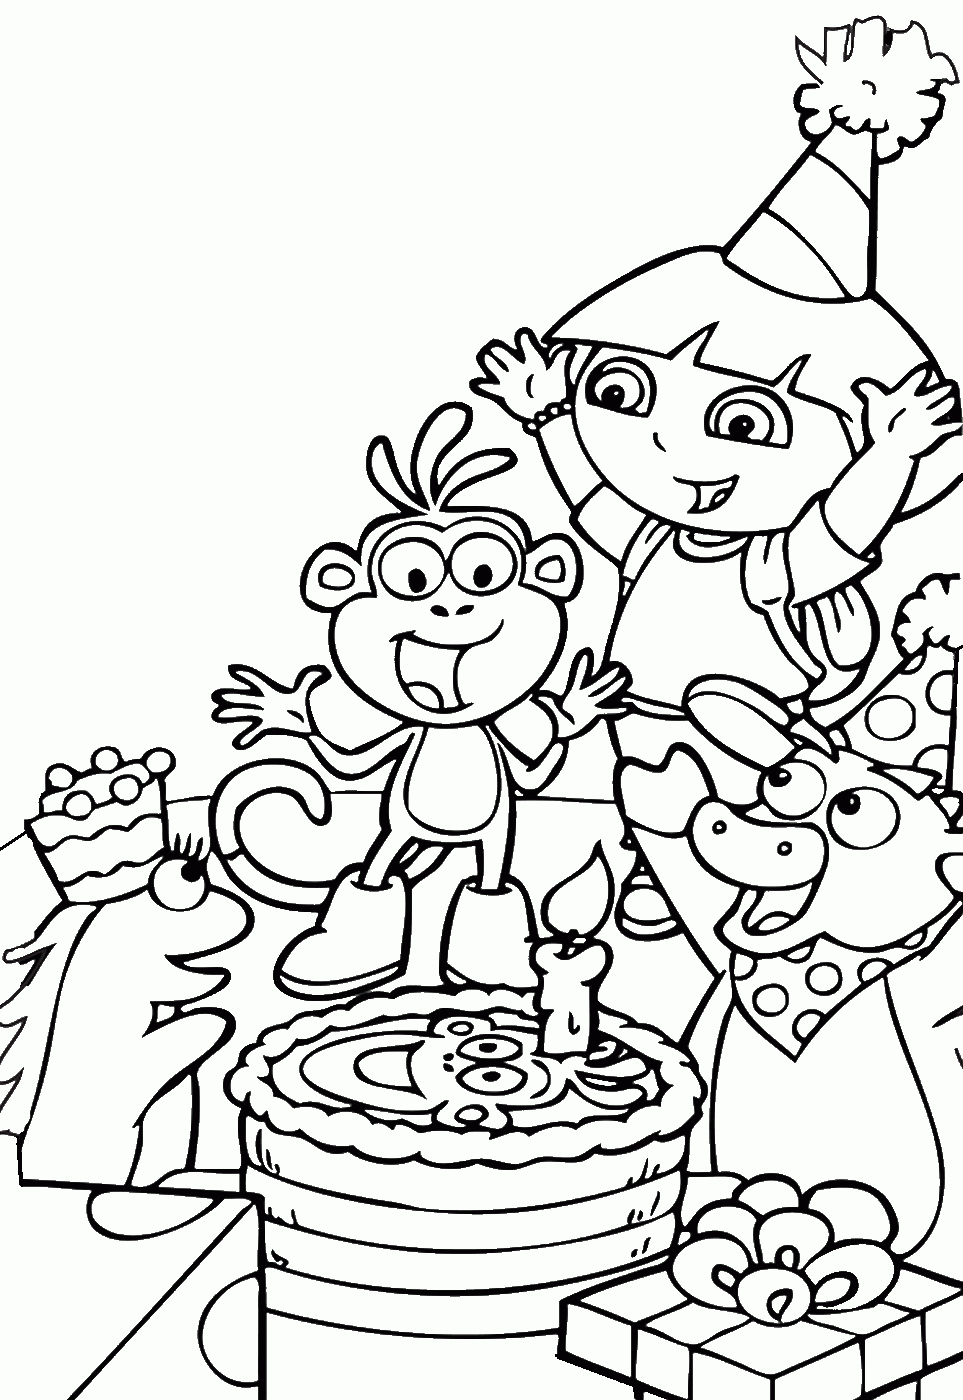 Dora the Explorer Coloring Pages Cartoons cl_dora122 Printable 2020 2629 Coloring4free